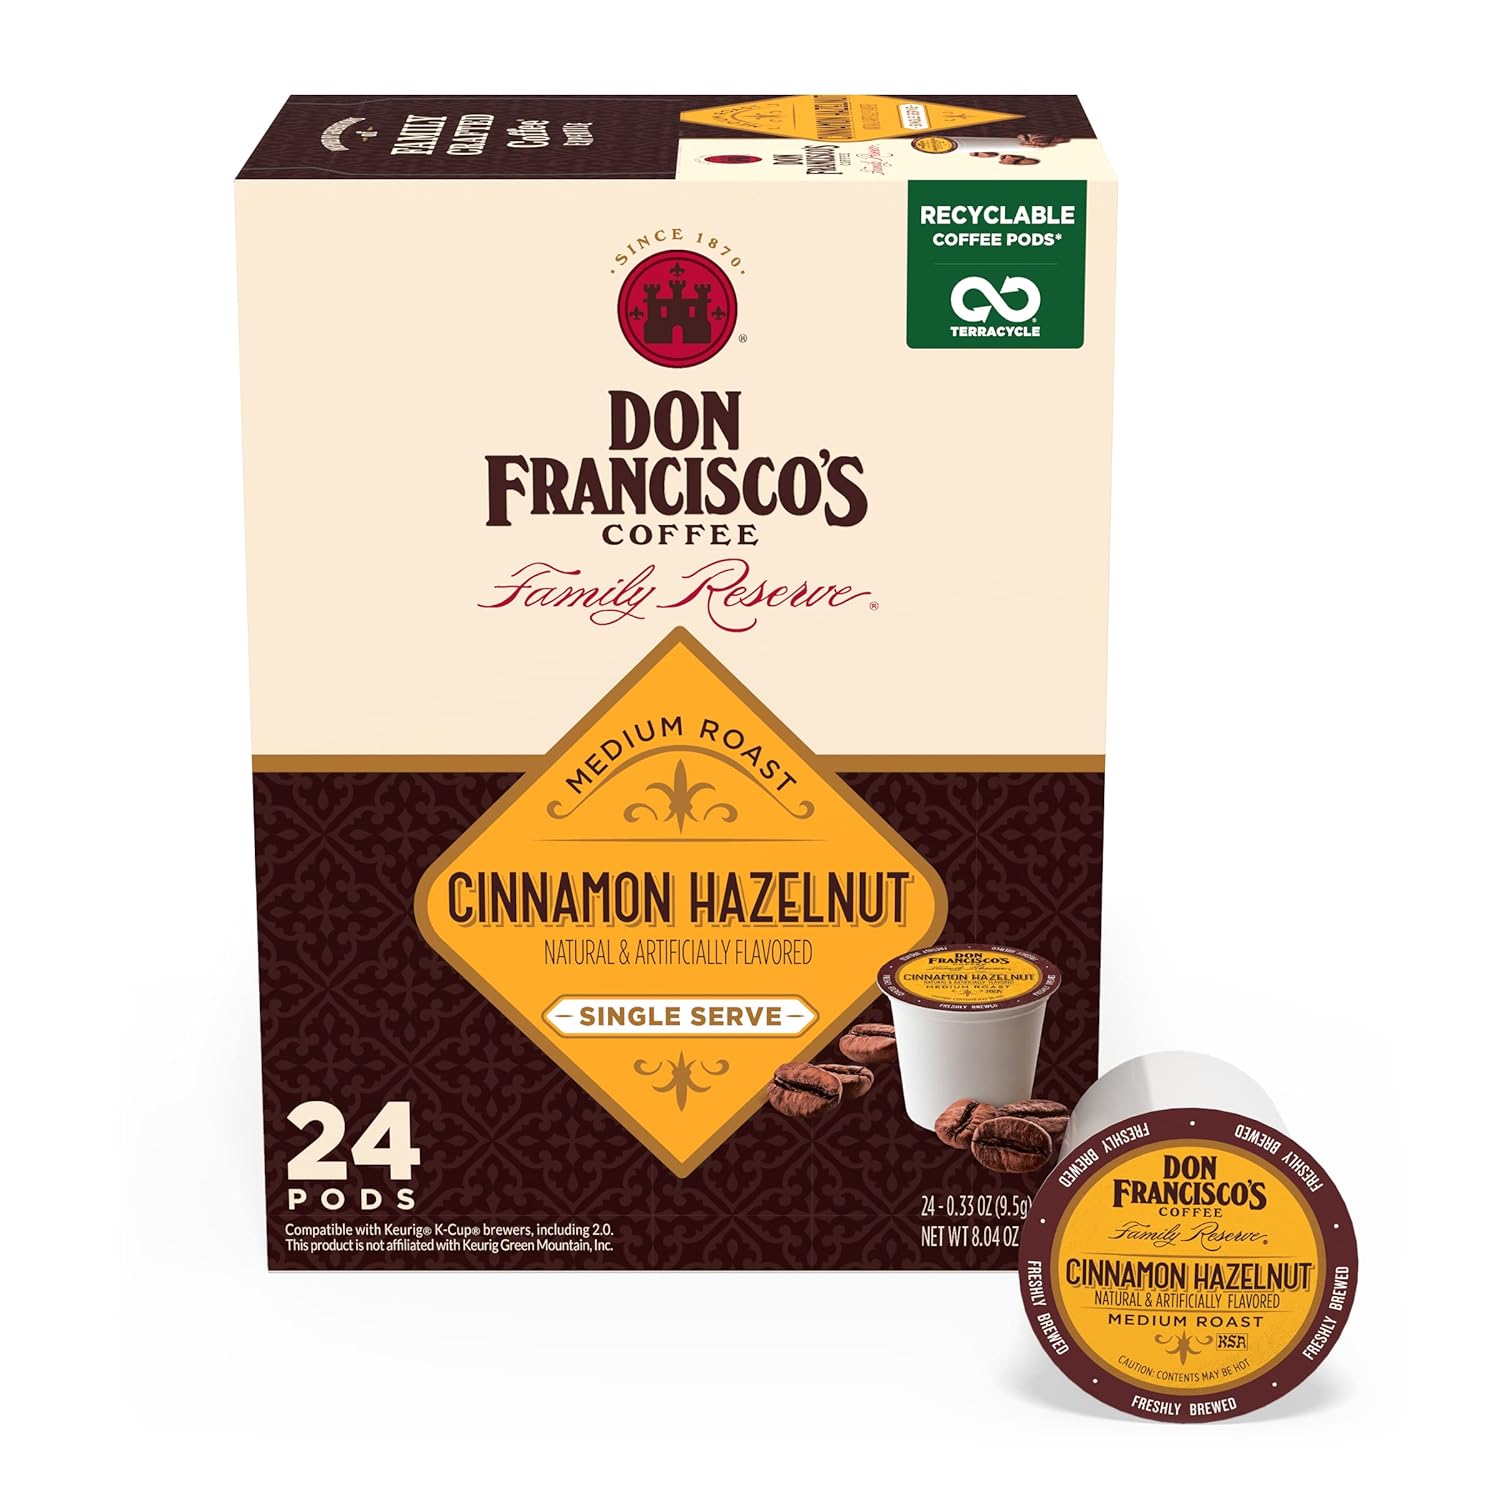 Don Francisco's Cinnamon Hazelnut Flavored Medium Roast Coffee Pods - 24 Count - Recyclable Single-Serve Coffee Pods, Compatible with your K- Cup Keurig Coffee Maker